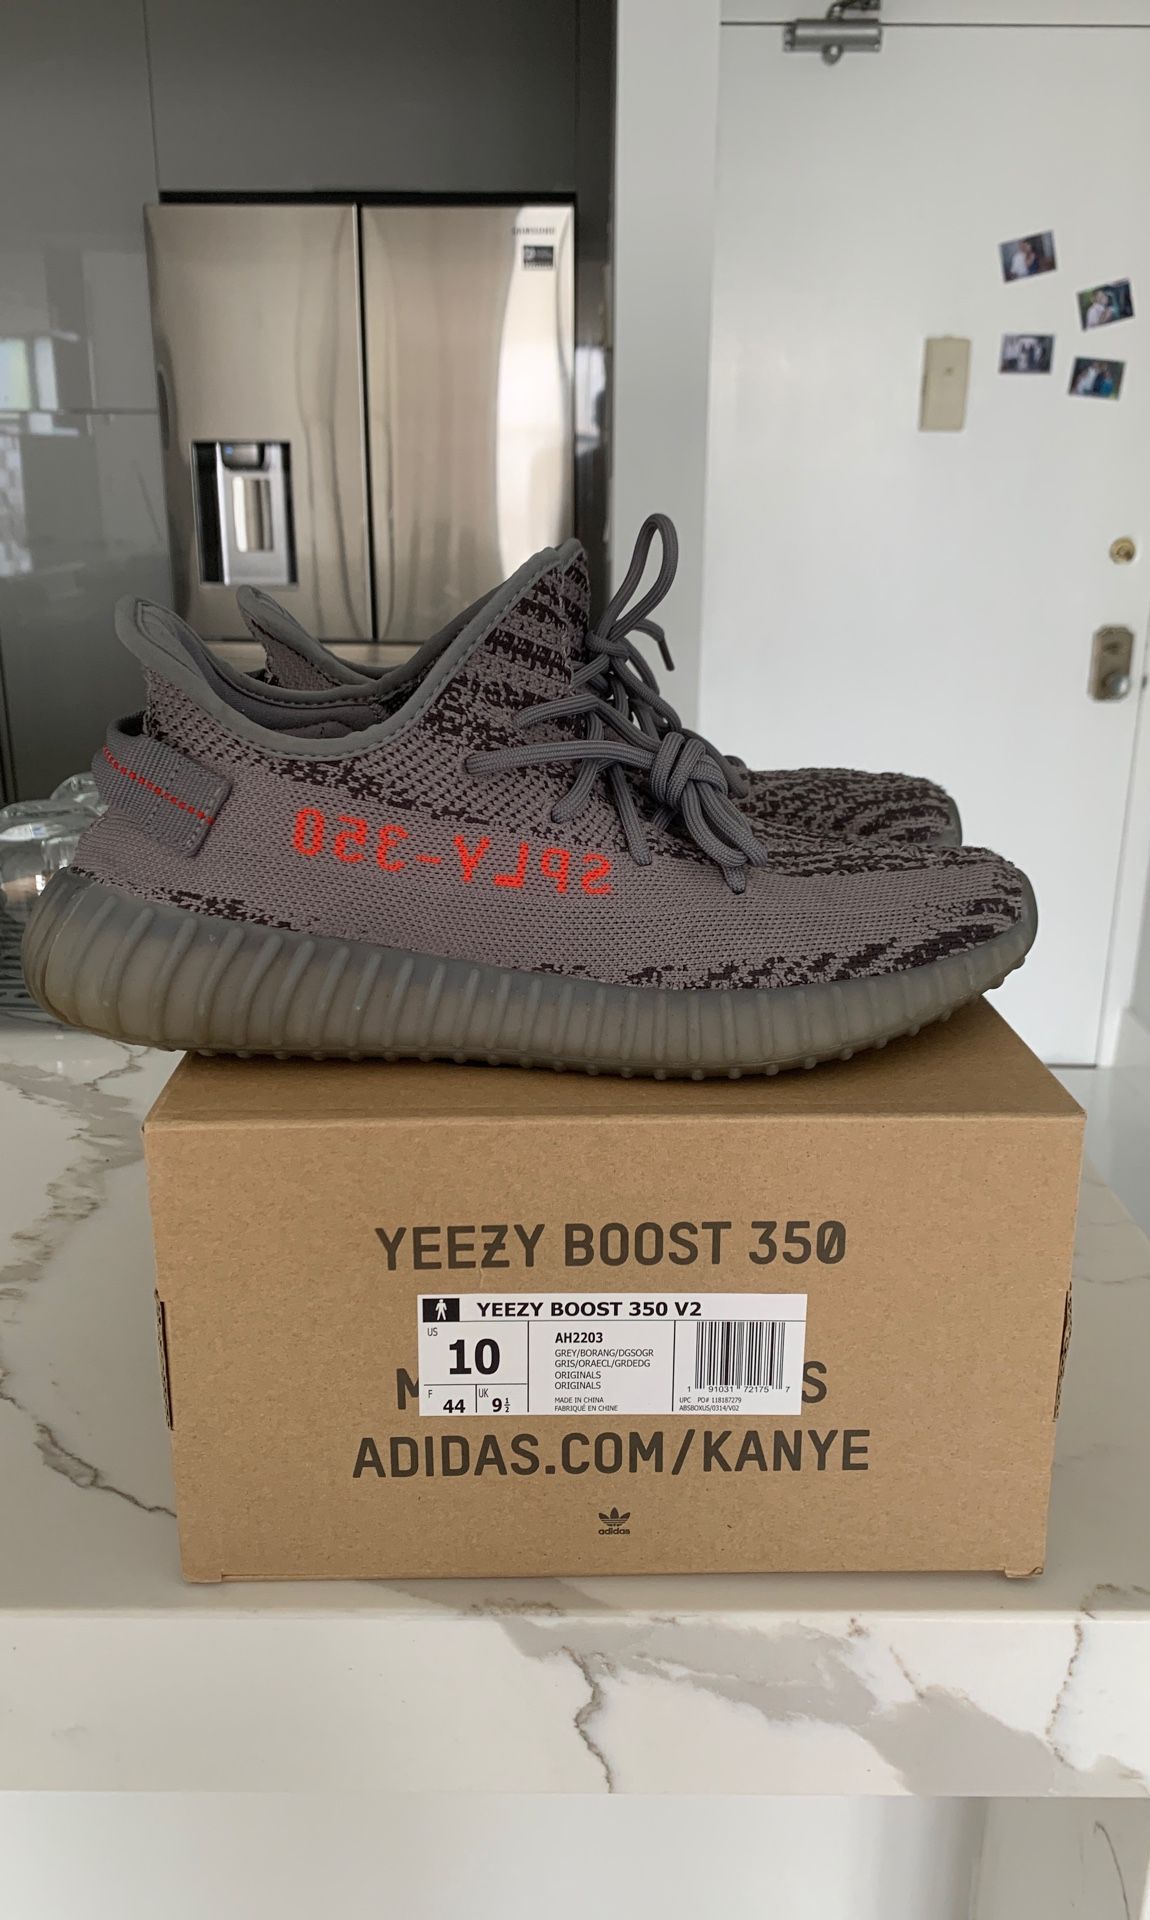 Adidas yeezy 350 boost v2 beluga 2.0 good condition 100% AUTHENTIC size 10